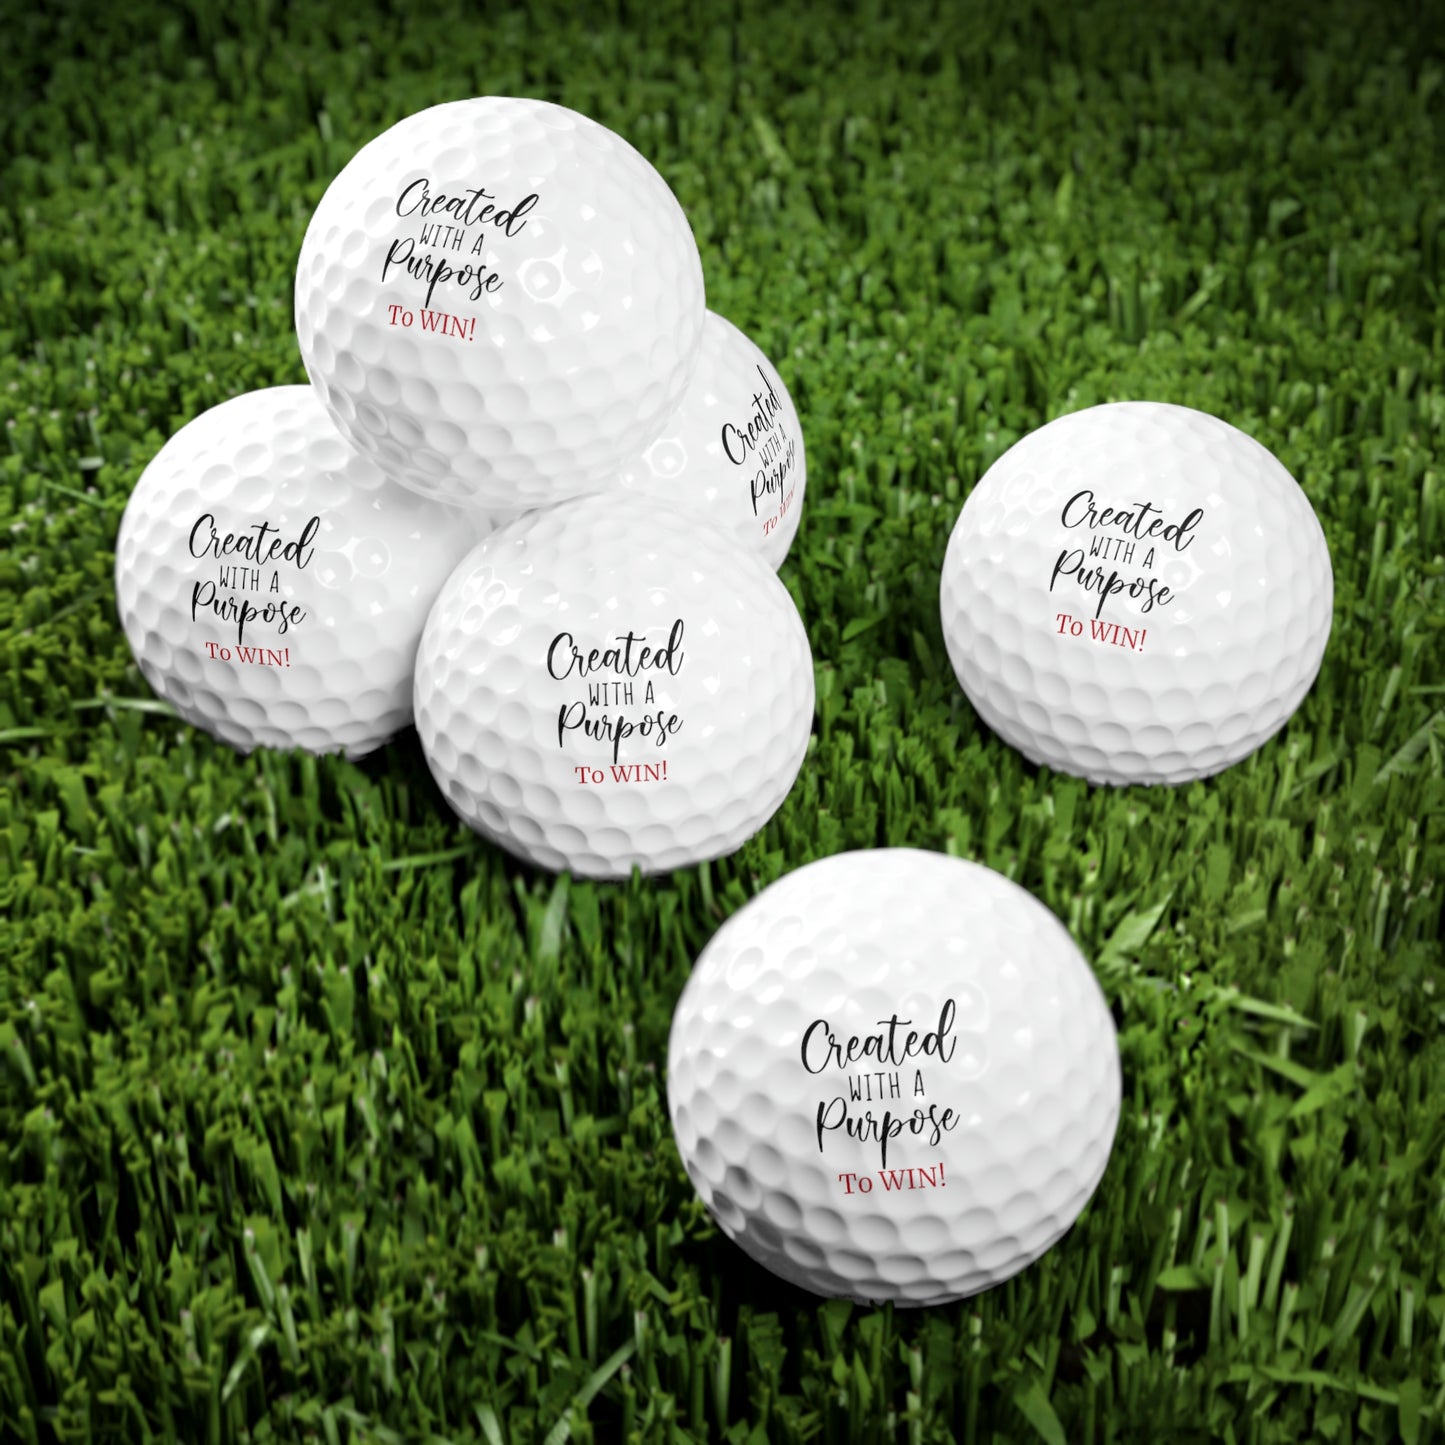 Inspirational (Created With a Purpose. To WIN/ Golf Balls, 6pcs)